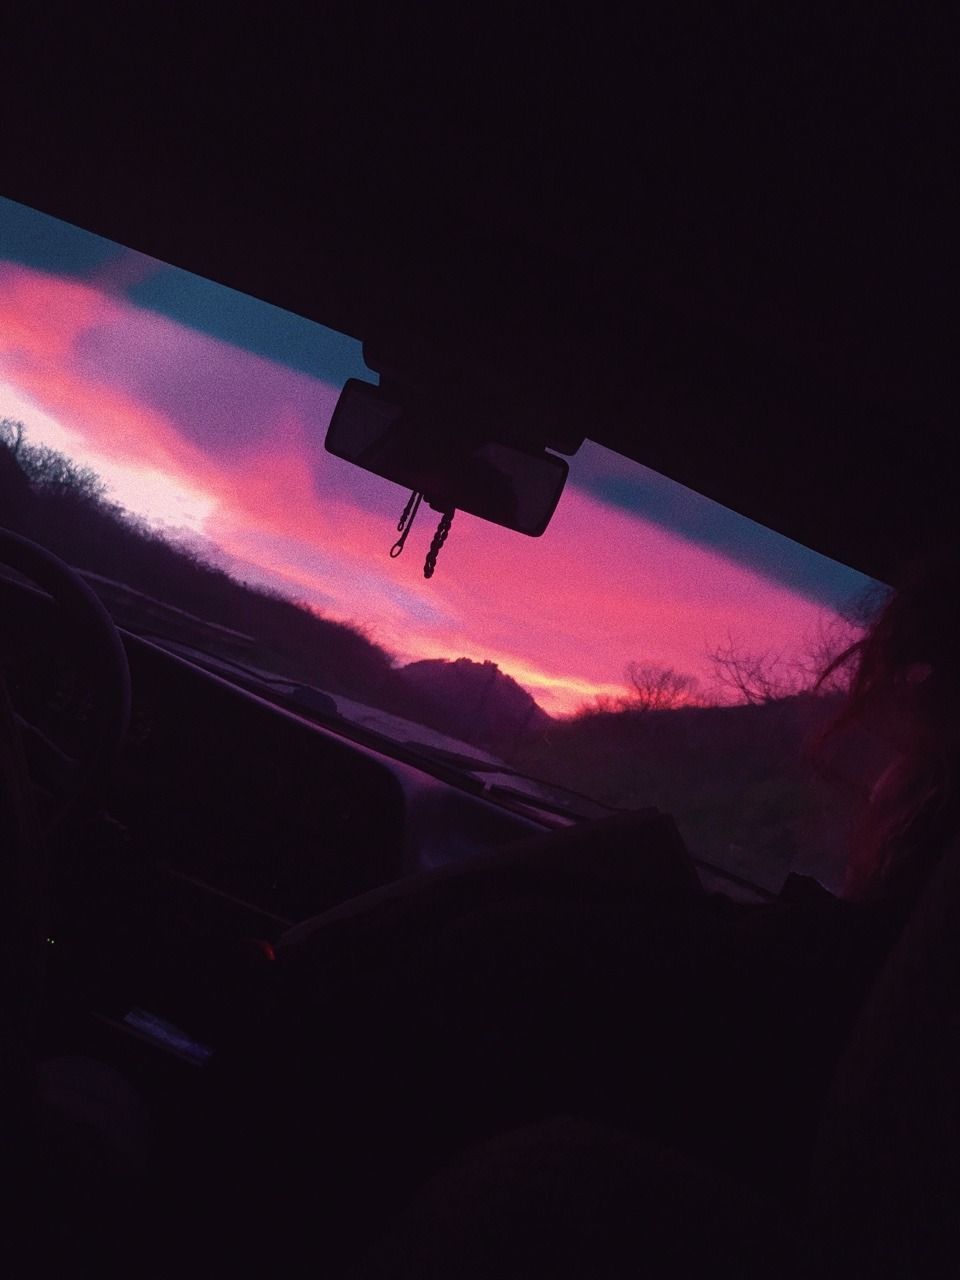 A car dashboard with a beautiful sunset in the background. - Sunshine